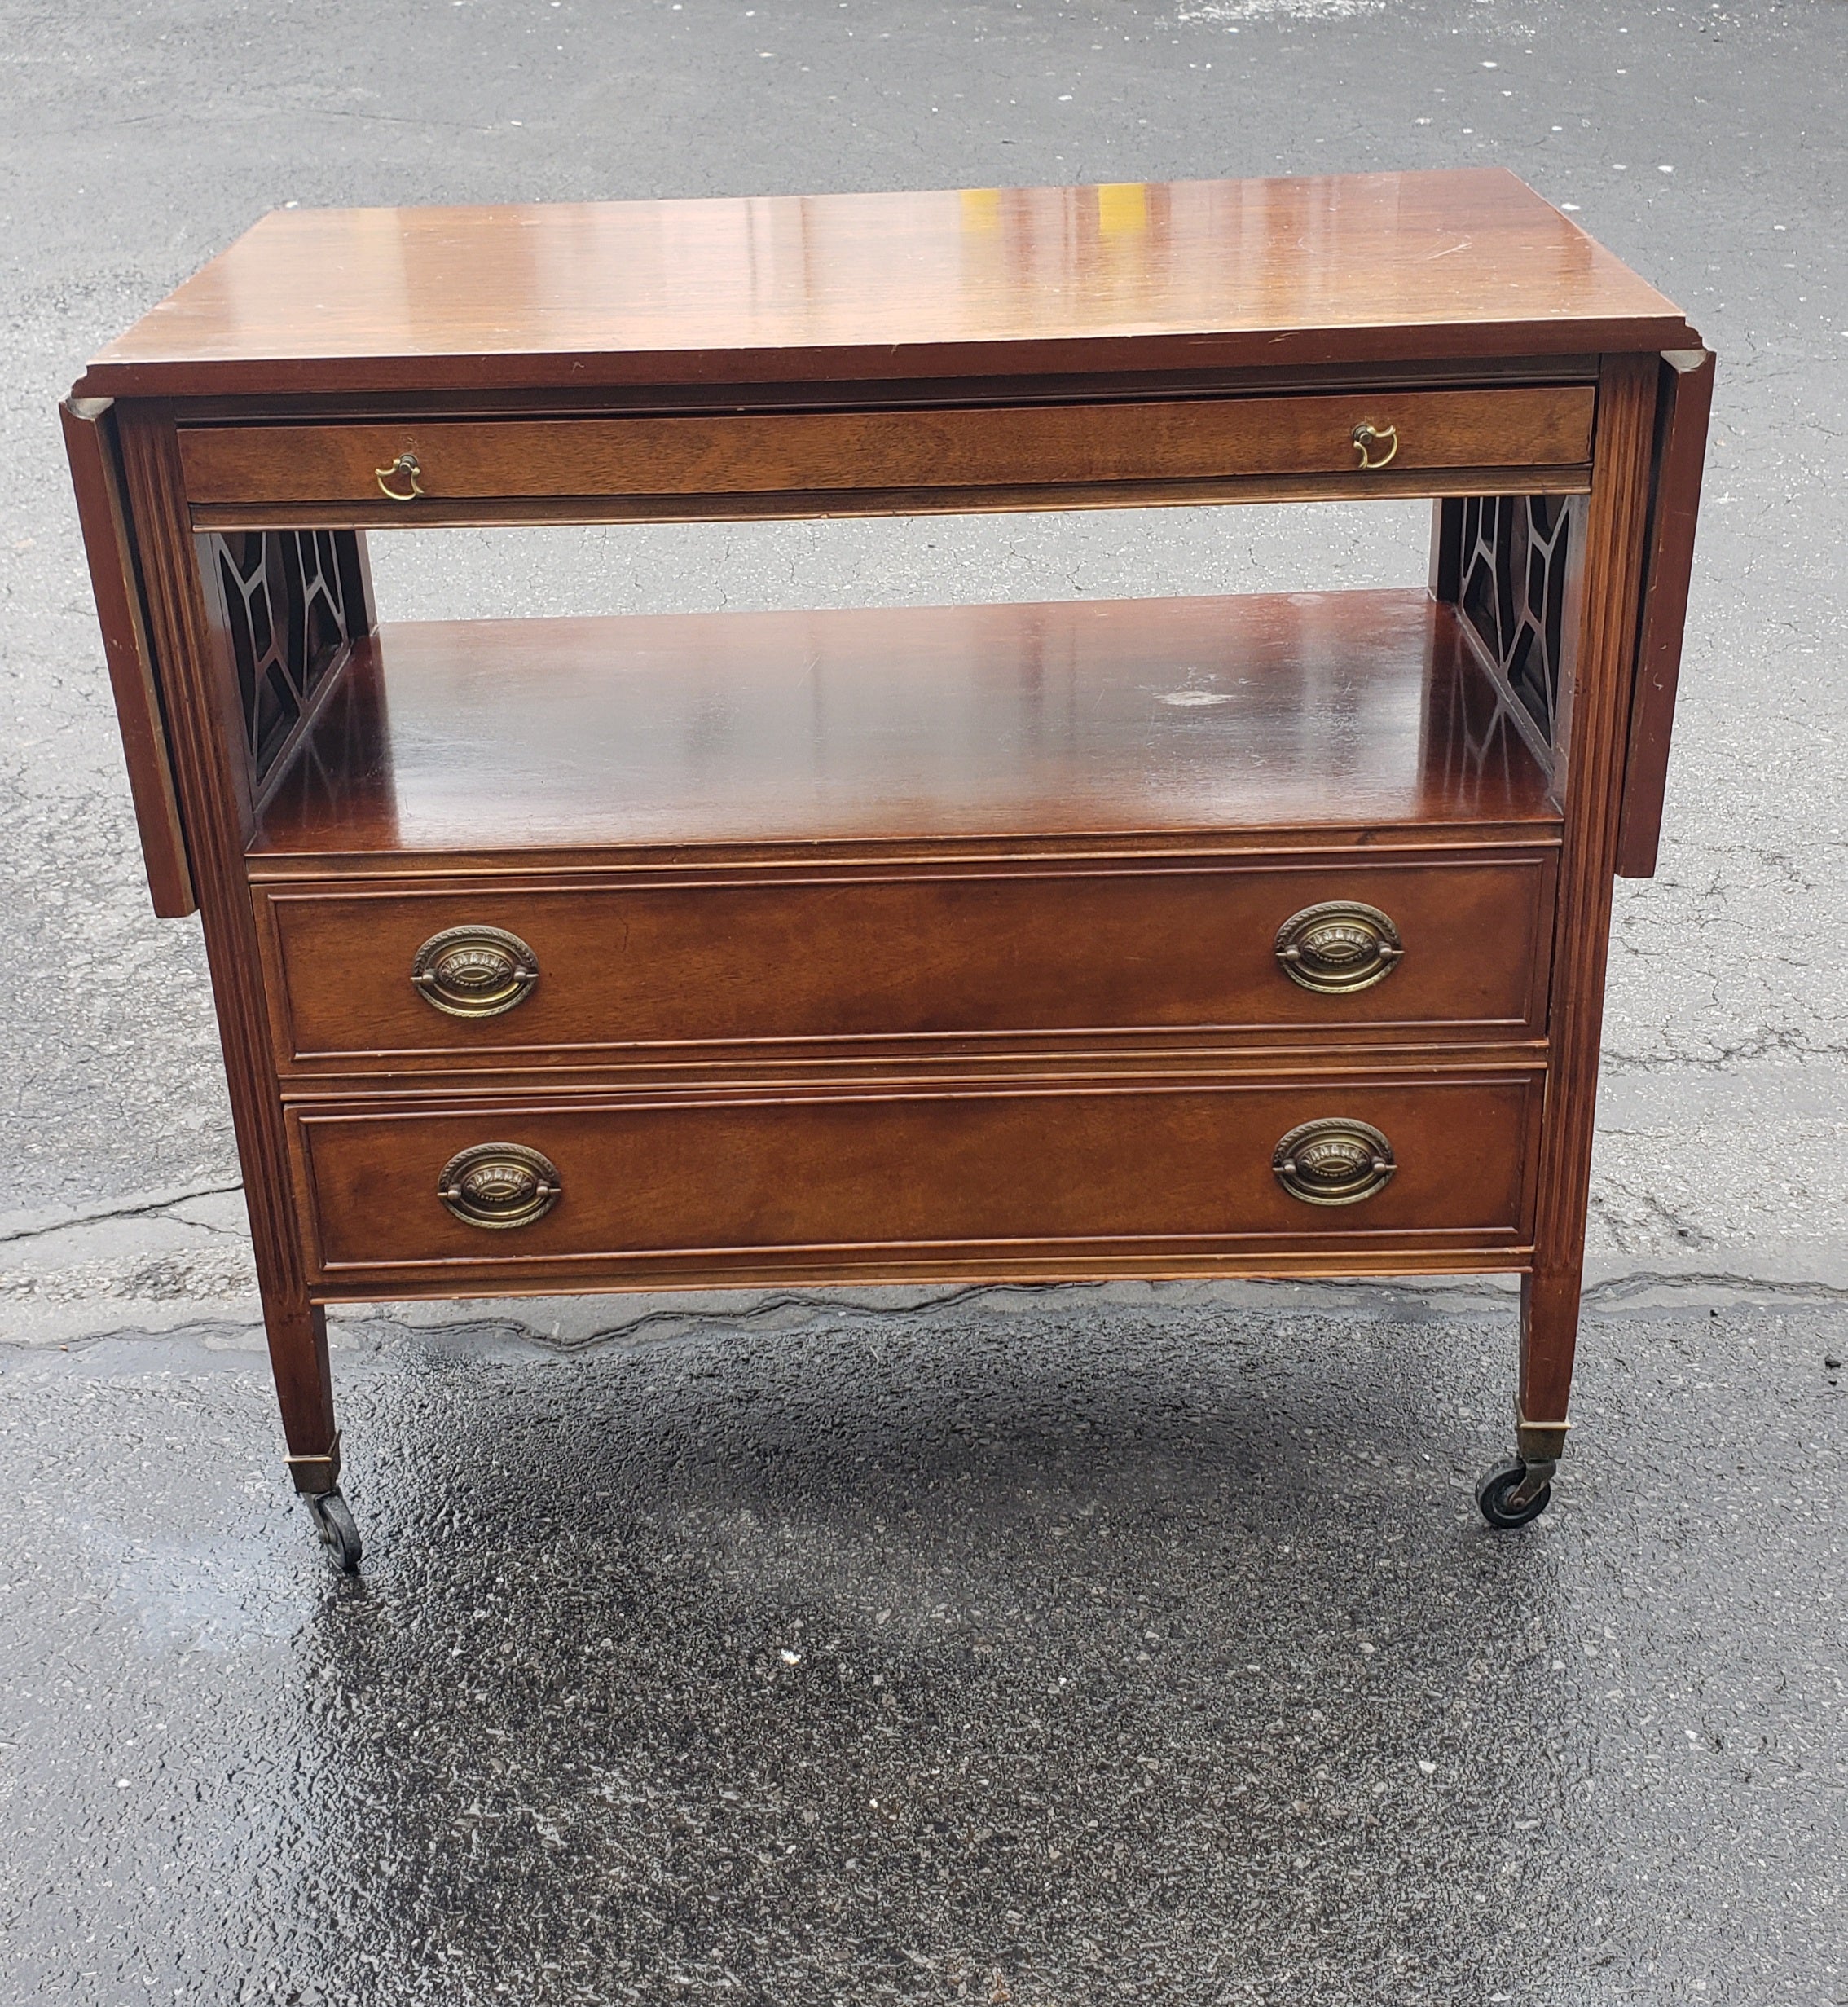 1960s Federal style genuine mahogany drop-leaf rolling buffet server and bar cart with 3 drawers functioning perfectly, with dovetail joints construction. Measures 62.25